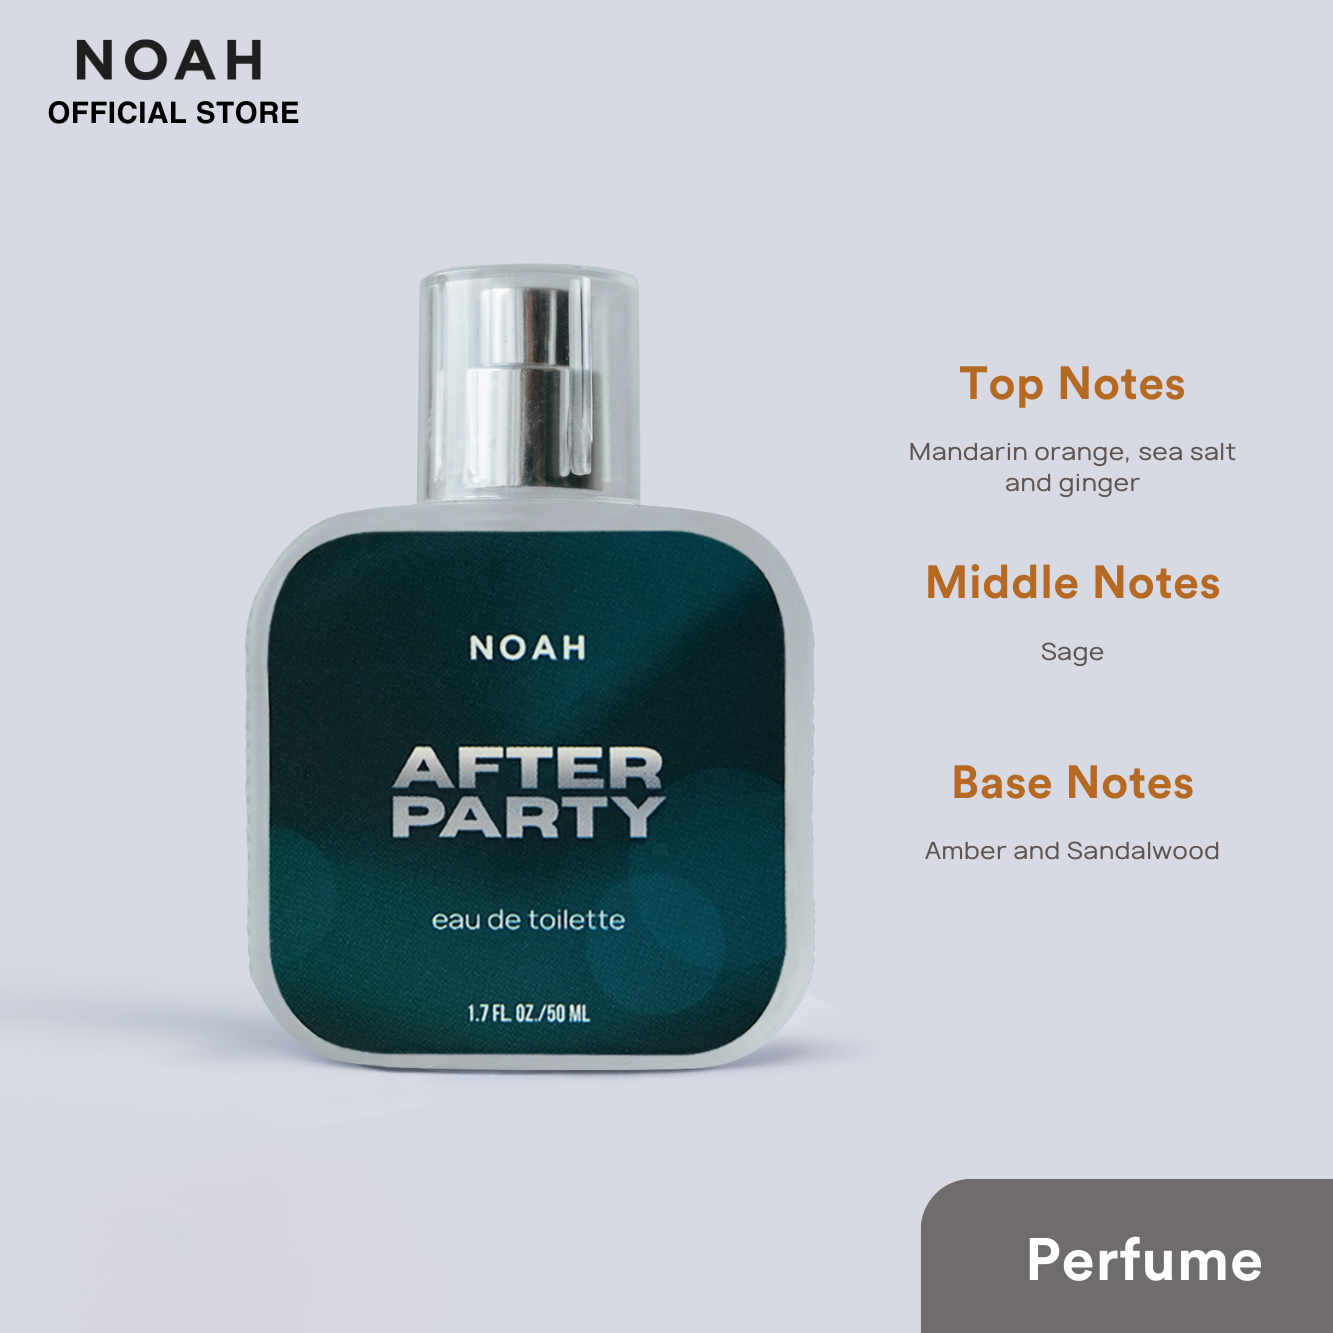 NOAH EDT TRIO CASUALS GIFT PACK